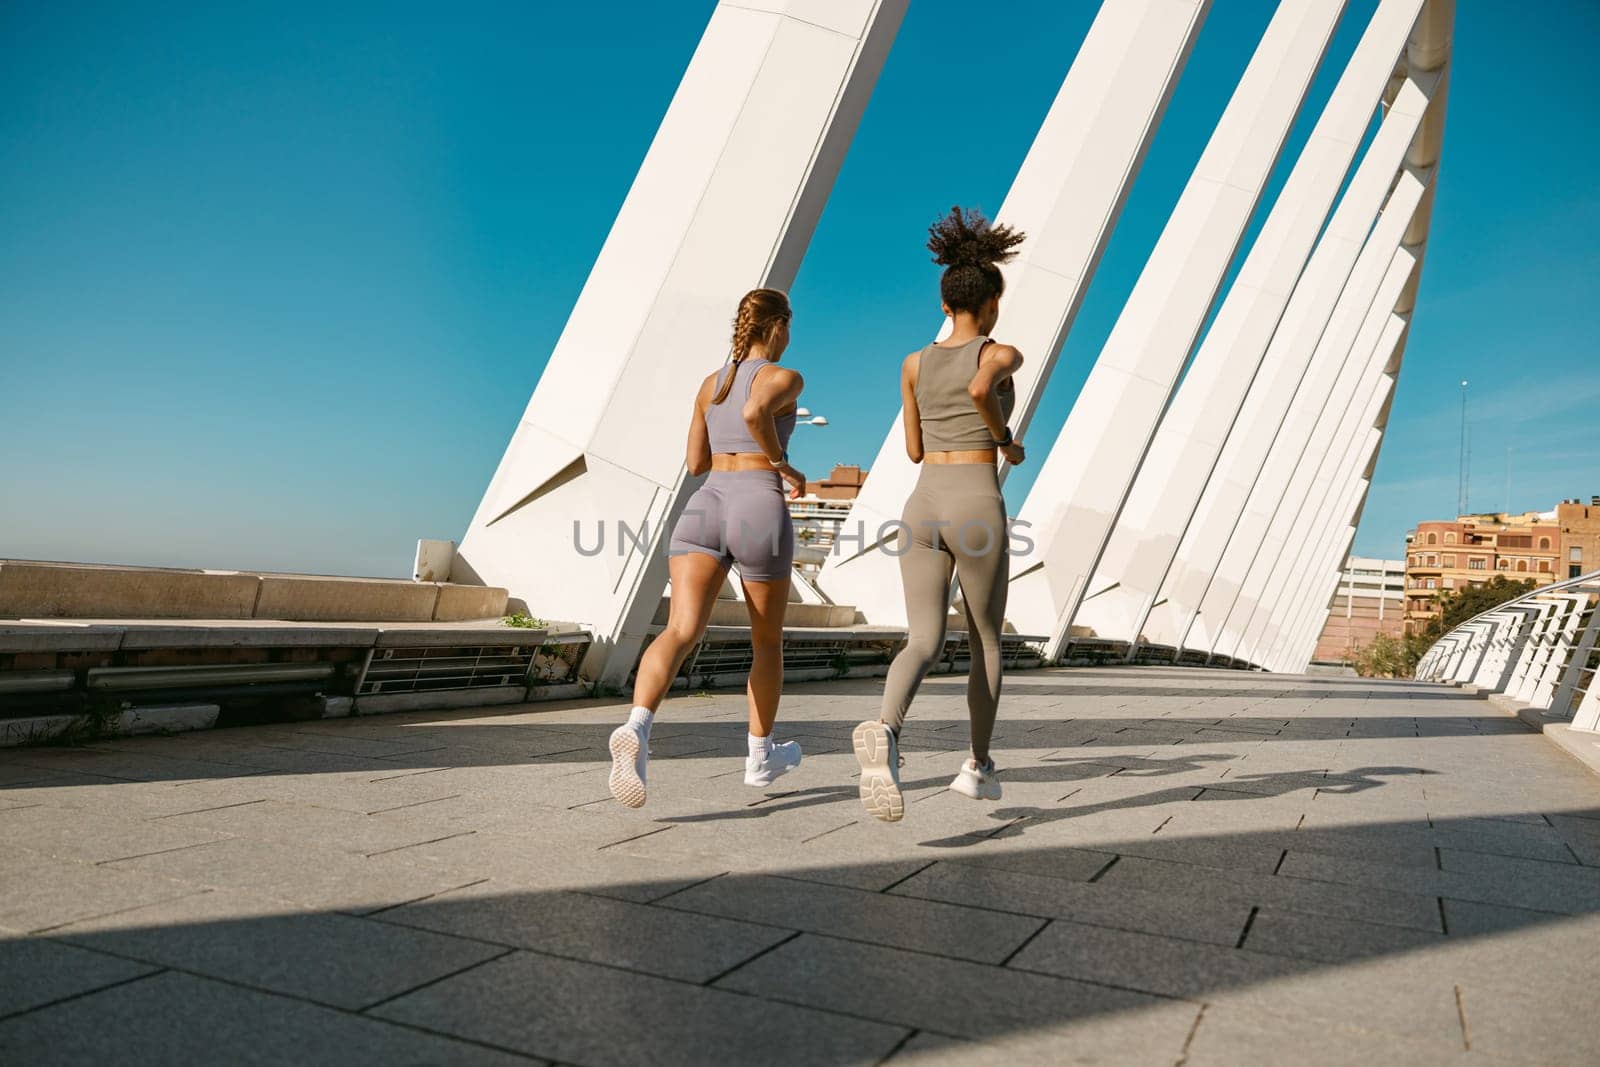 Back view of active women running side by side along an outdoor track on modern buildings background by Yaroslav_astakhov